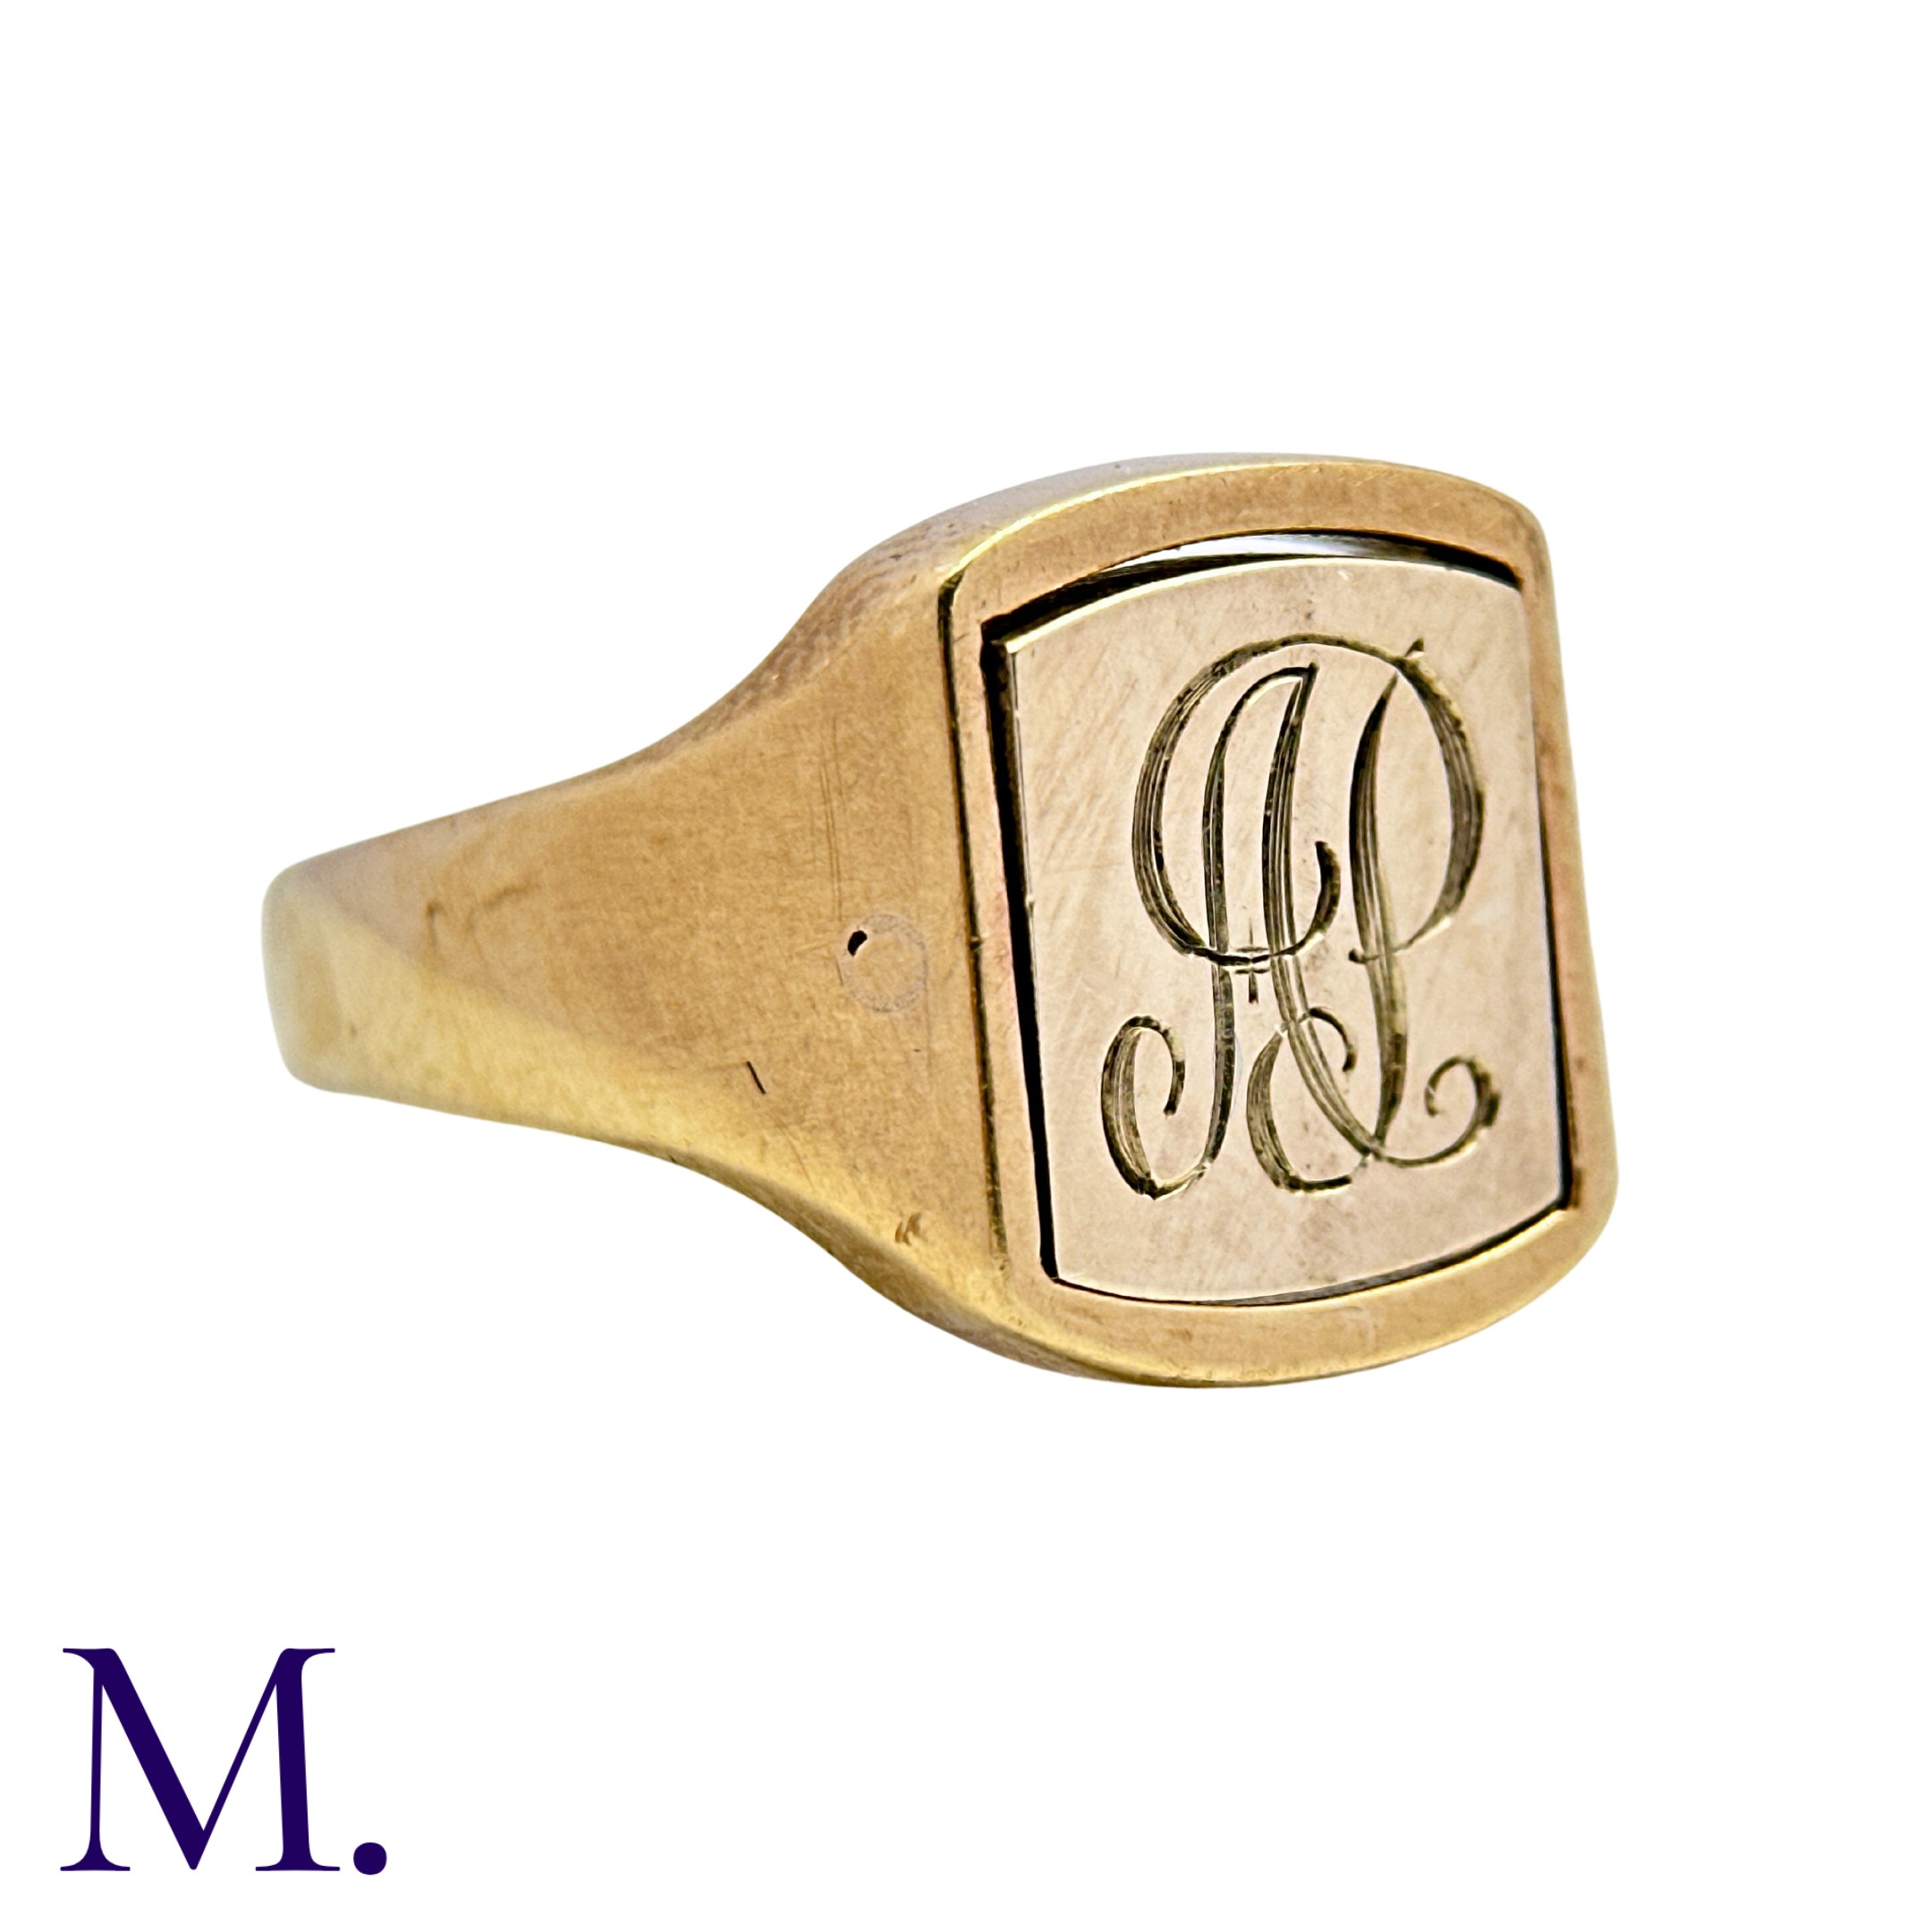 A Masonic Swivel Ring in 9k yellow gold, the signet ring with blue enamel set with gold square and - Image 4 of 4